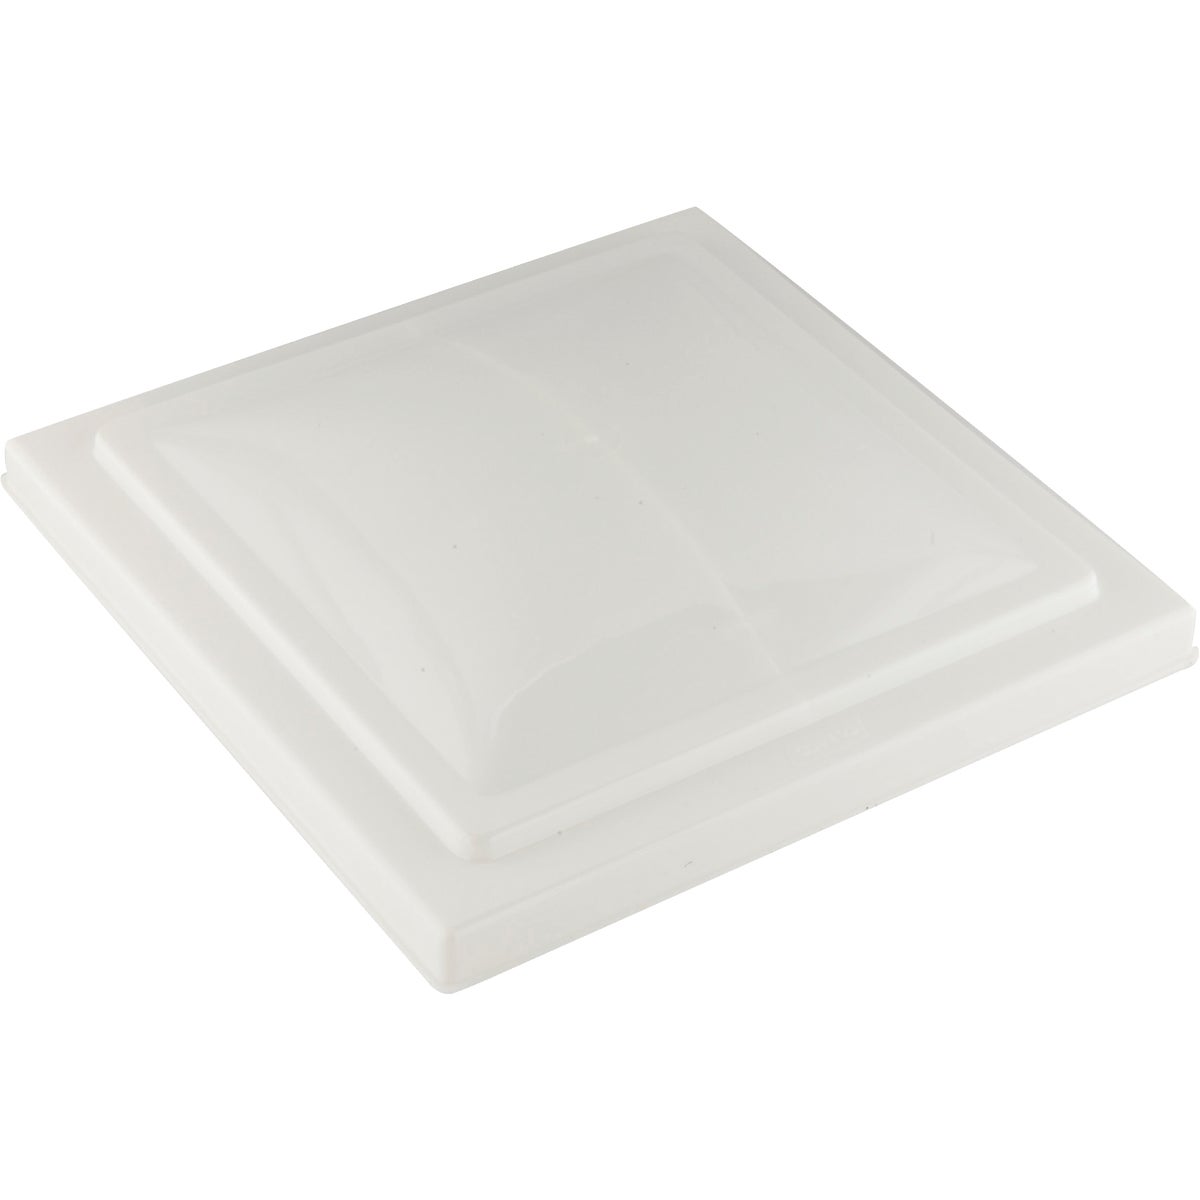 Item 587672, Impact-resistant vent lids come preassembled and include all mounting 